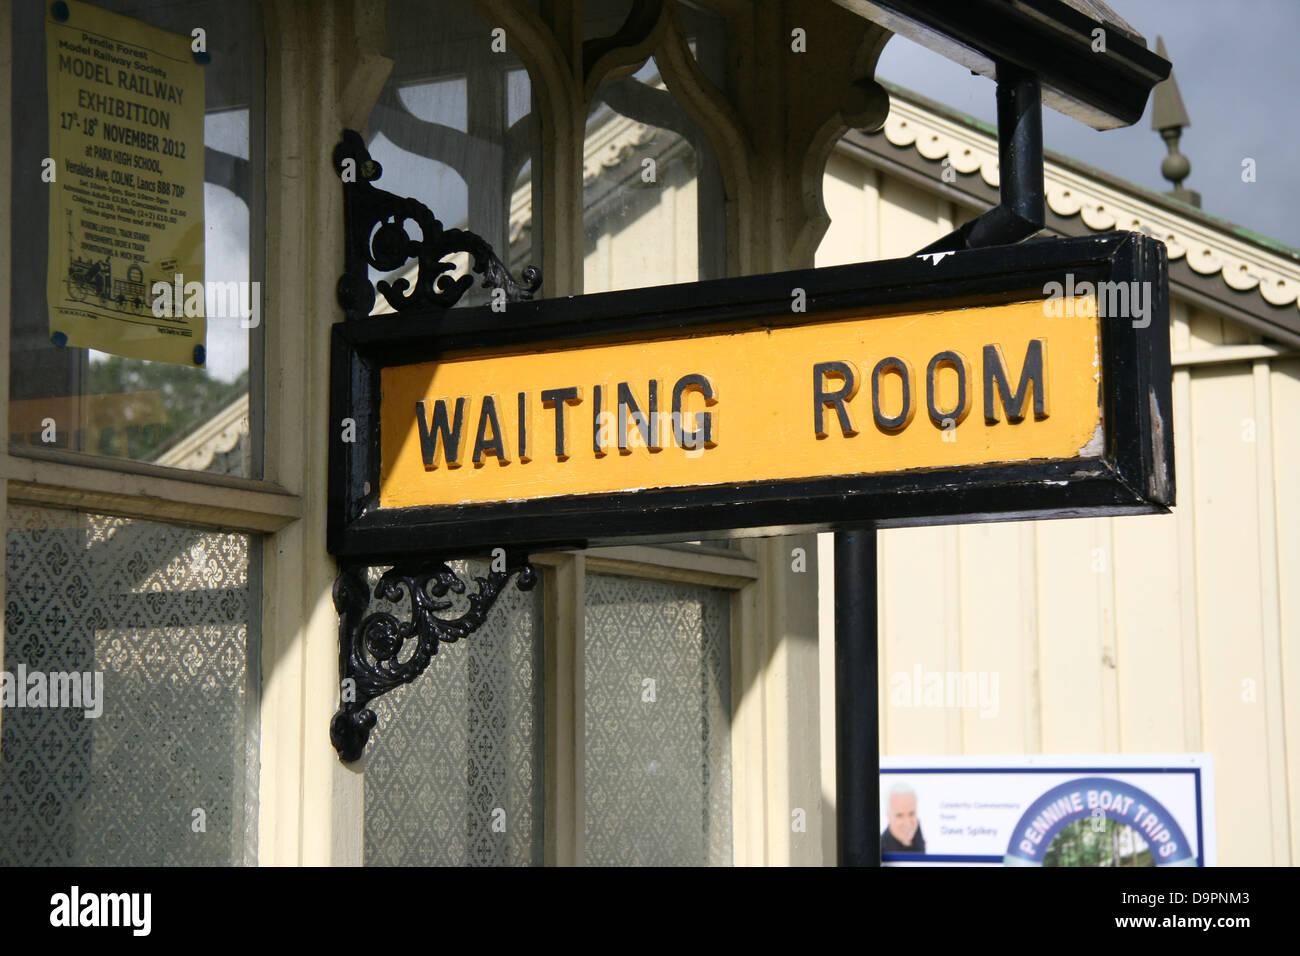 Waiting room sign, Embsay Railway Station, Embsay and Bolton Abbey Steam Railway, North Yorkshire, UK Stock Photo